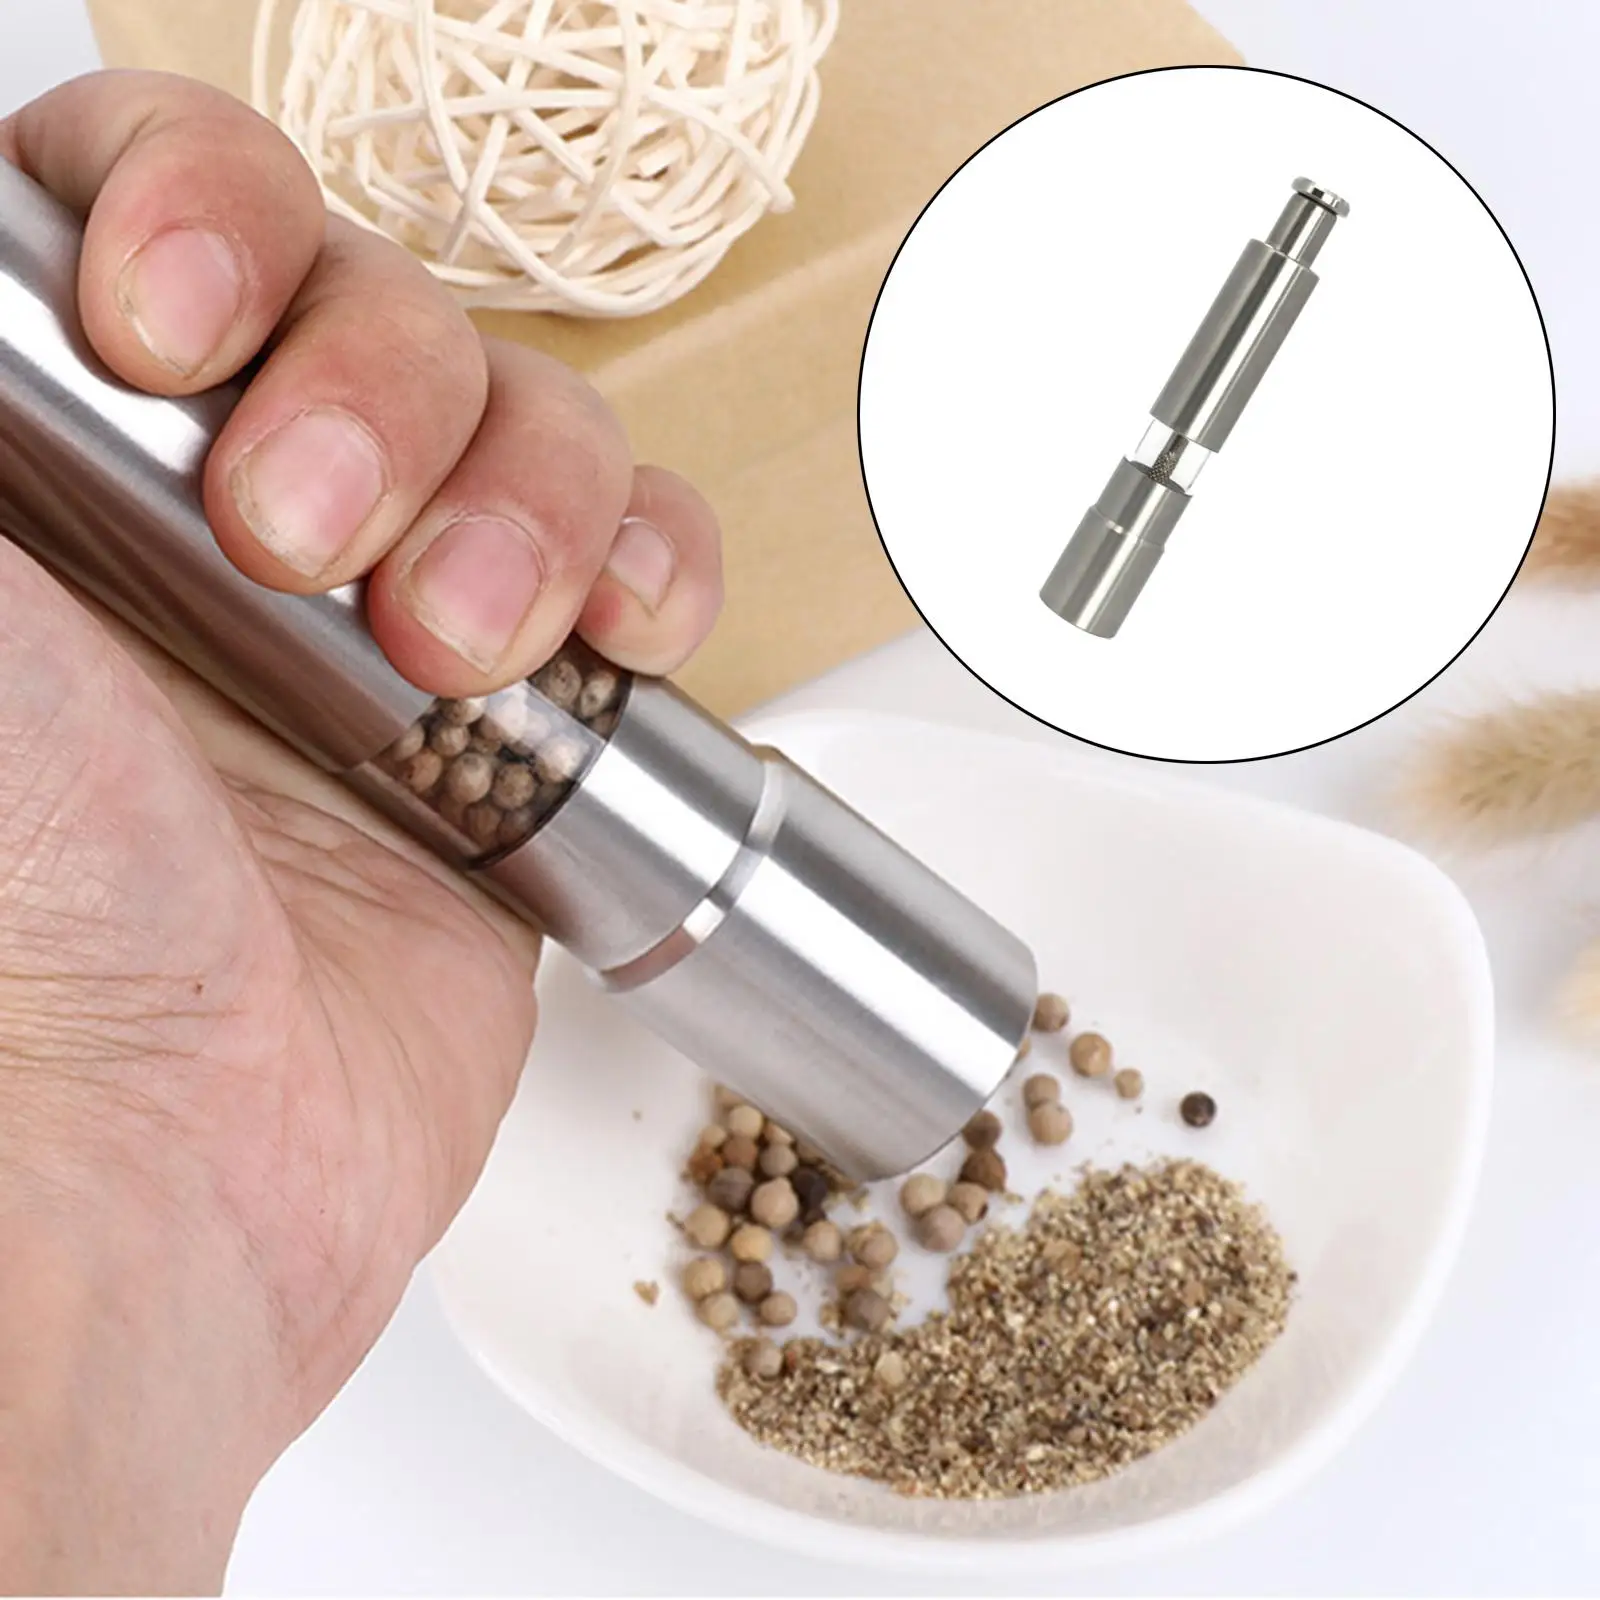 Manual Push or   Stainless Steel Professional for Cooking